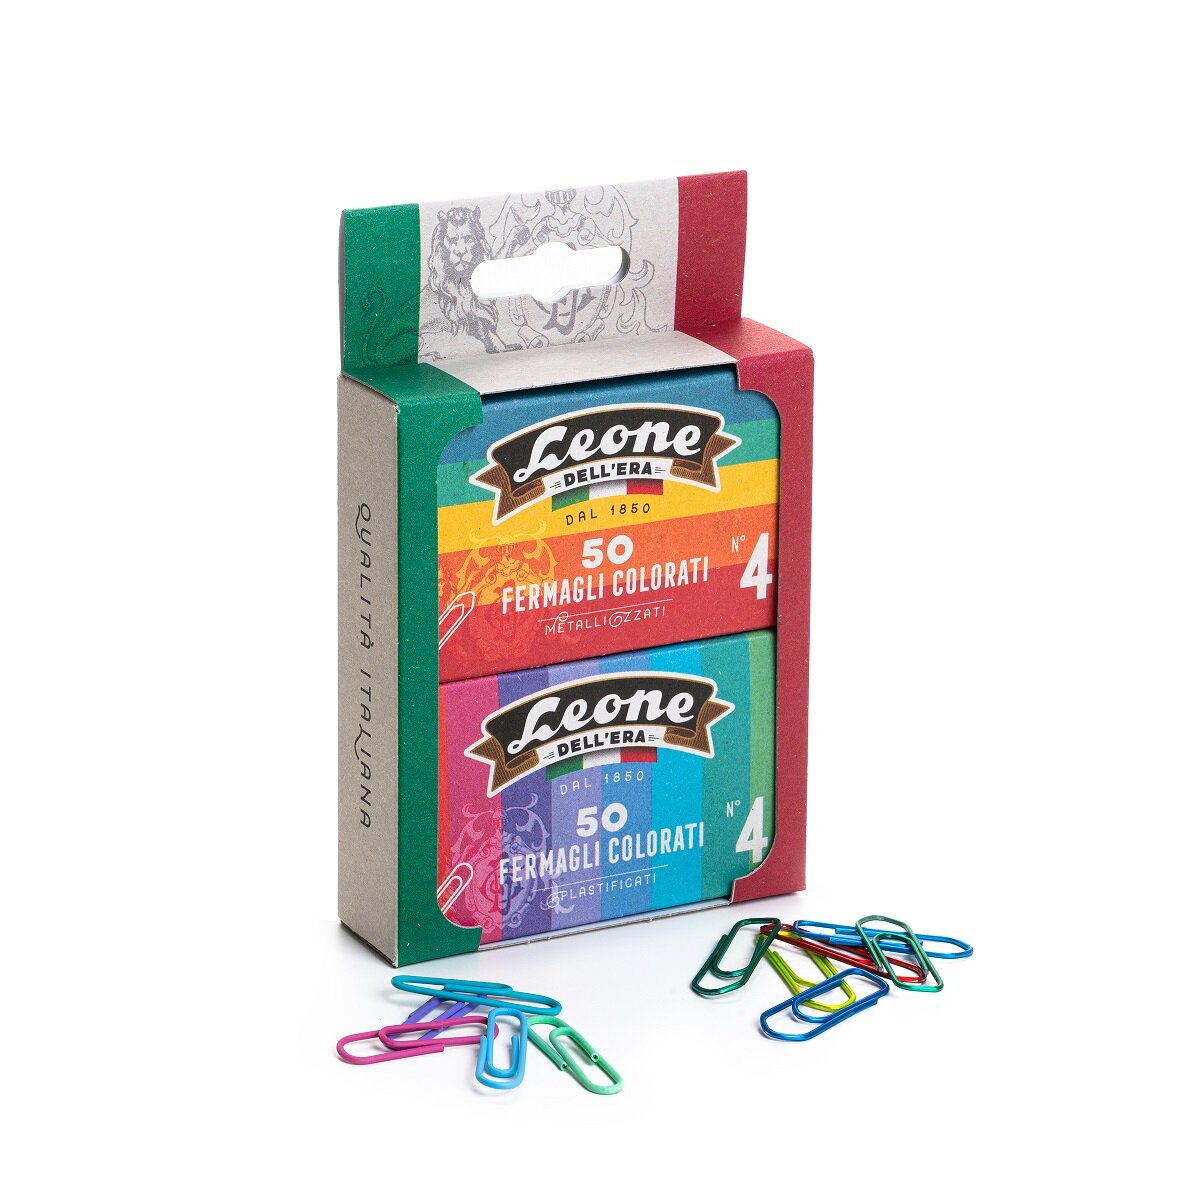 Lion Paper Clips - Combination Pack Color - Size 4 Leone dell'er made in italy